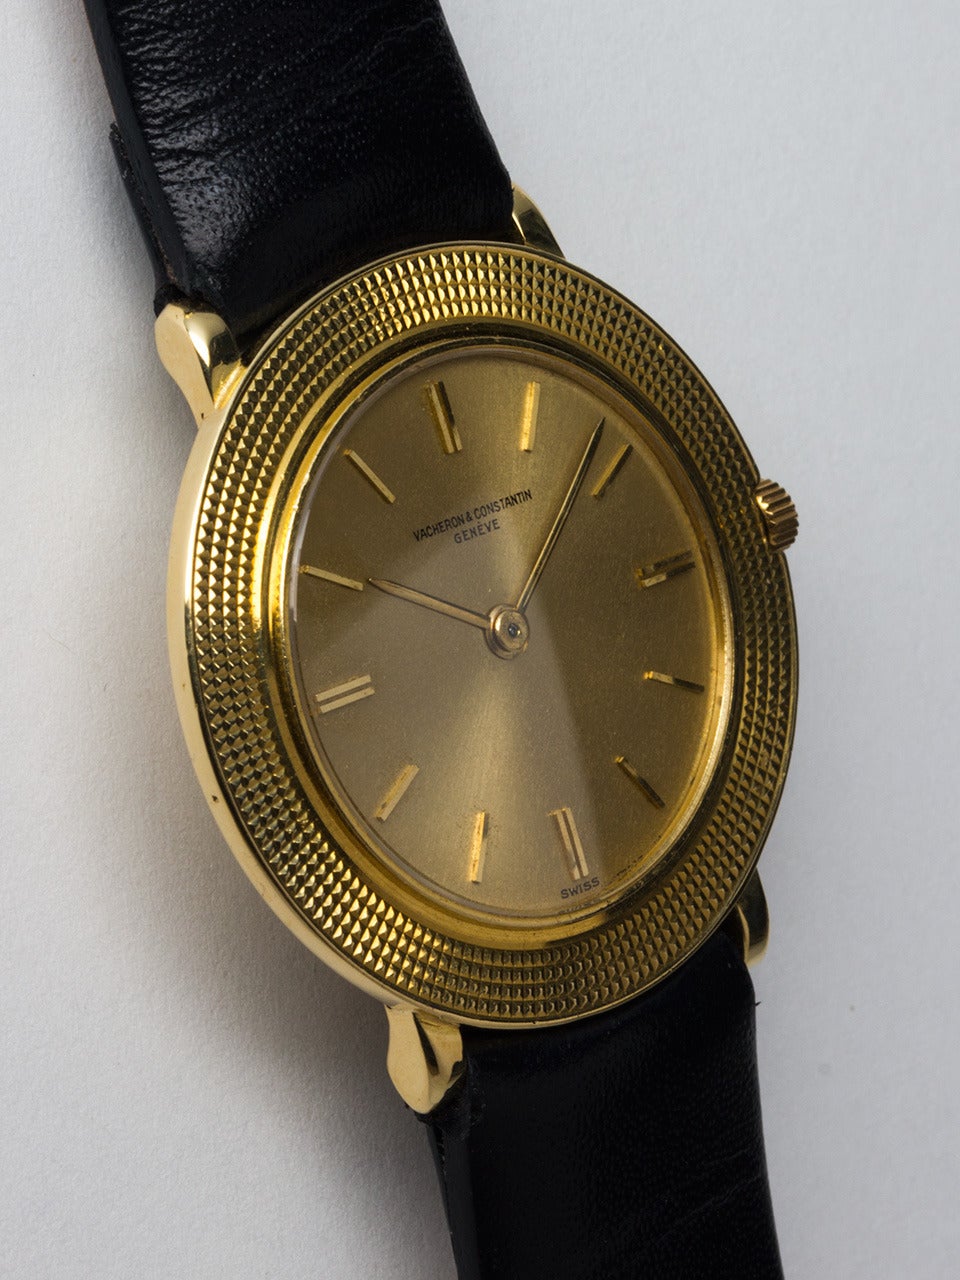 Vacheron & Constantin 18K yellow gold dress wristwatch with enlarged textured bezel, Ref. 6395, circa 1960s. 30 x 33.3mm case. With original champagne dial with raised gold markers and simple gold baton hands. Powered by a high-grade 18-jewel